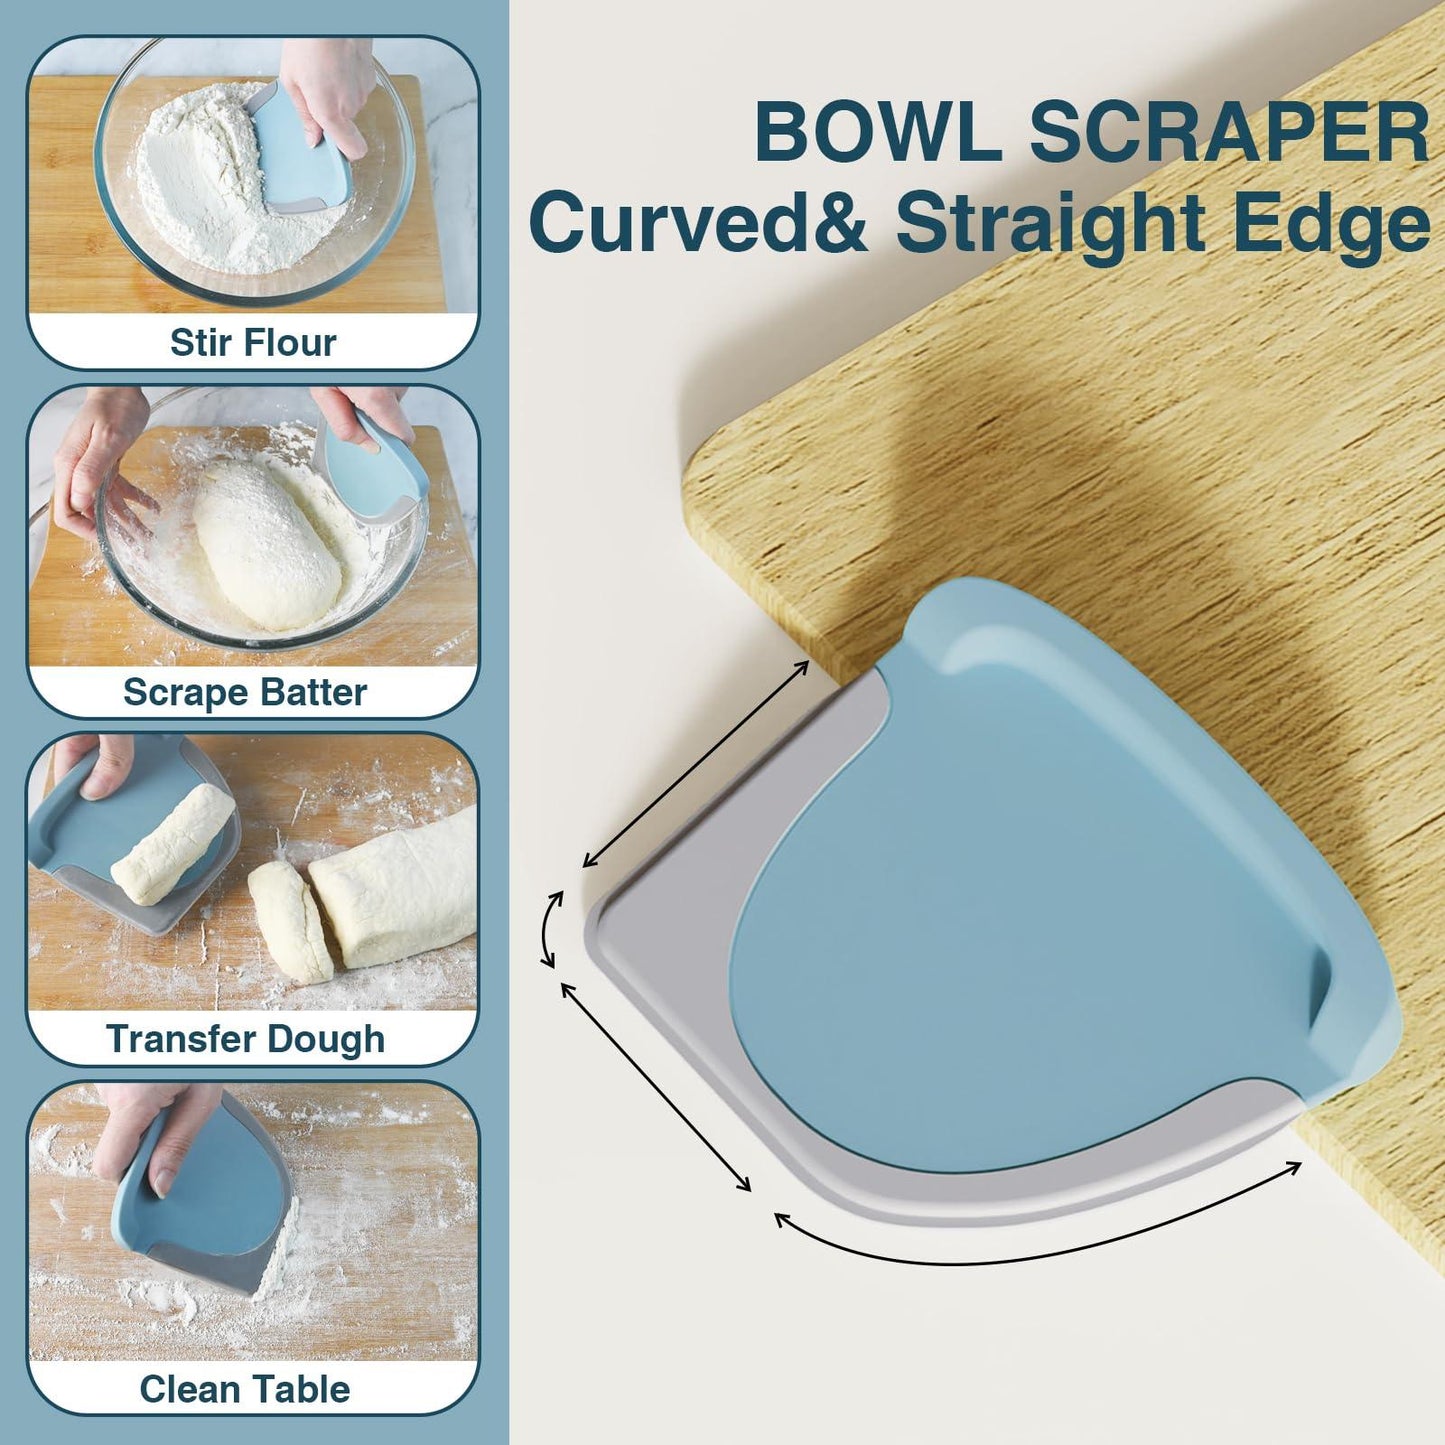 Bench Scraper Dough Cutter Tool - Bowl Pastry Scraper for Bread Cake Pizza, Bench Knife Kitchen Dough Scraper for Baking, Stainless Steel Food Scraper with Grip Handles & Measuring Scale, Blue - CookCave